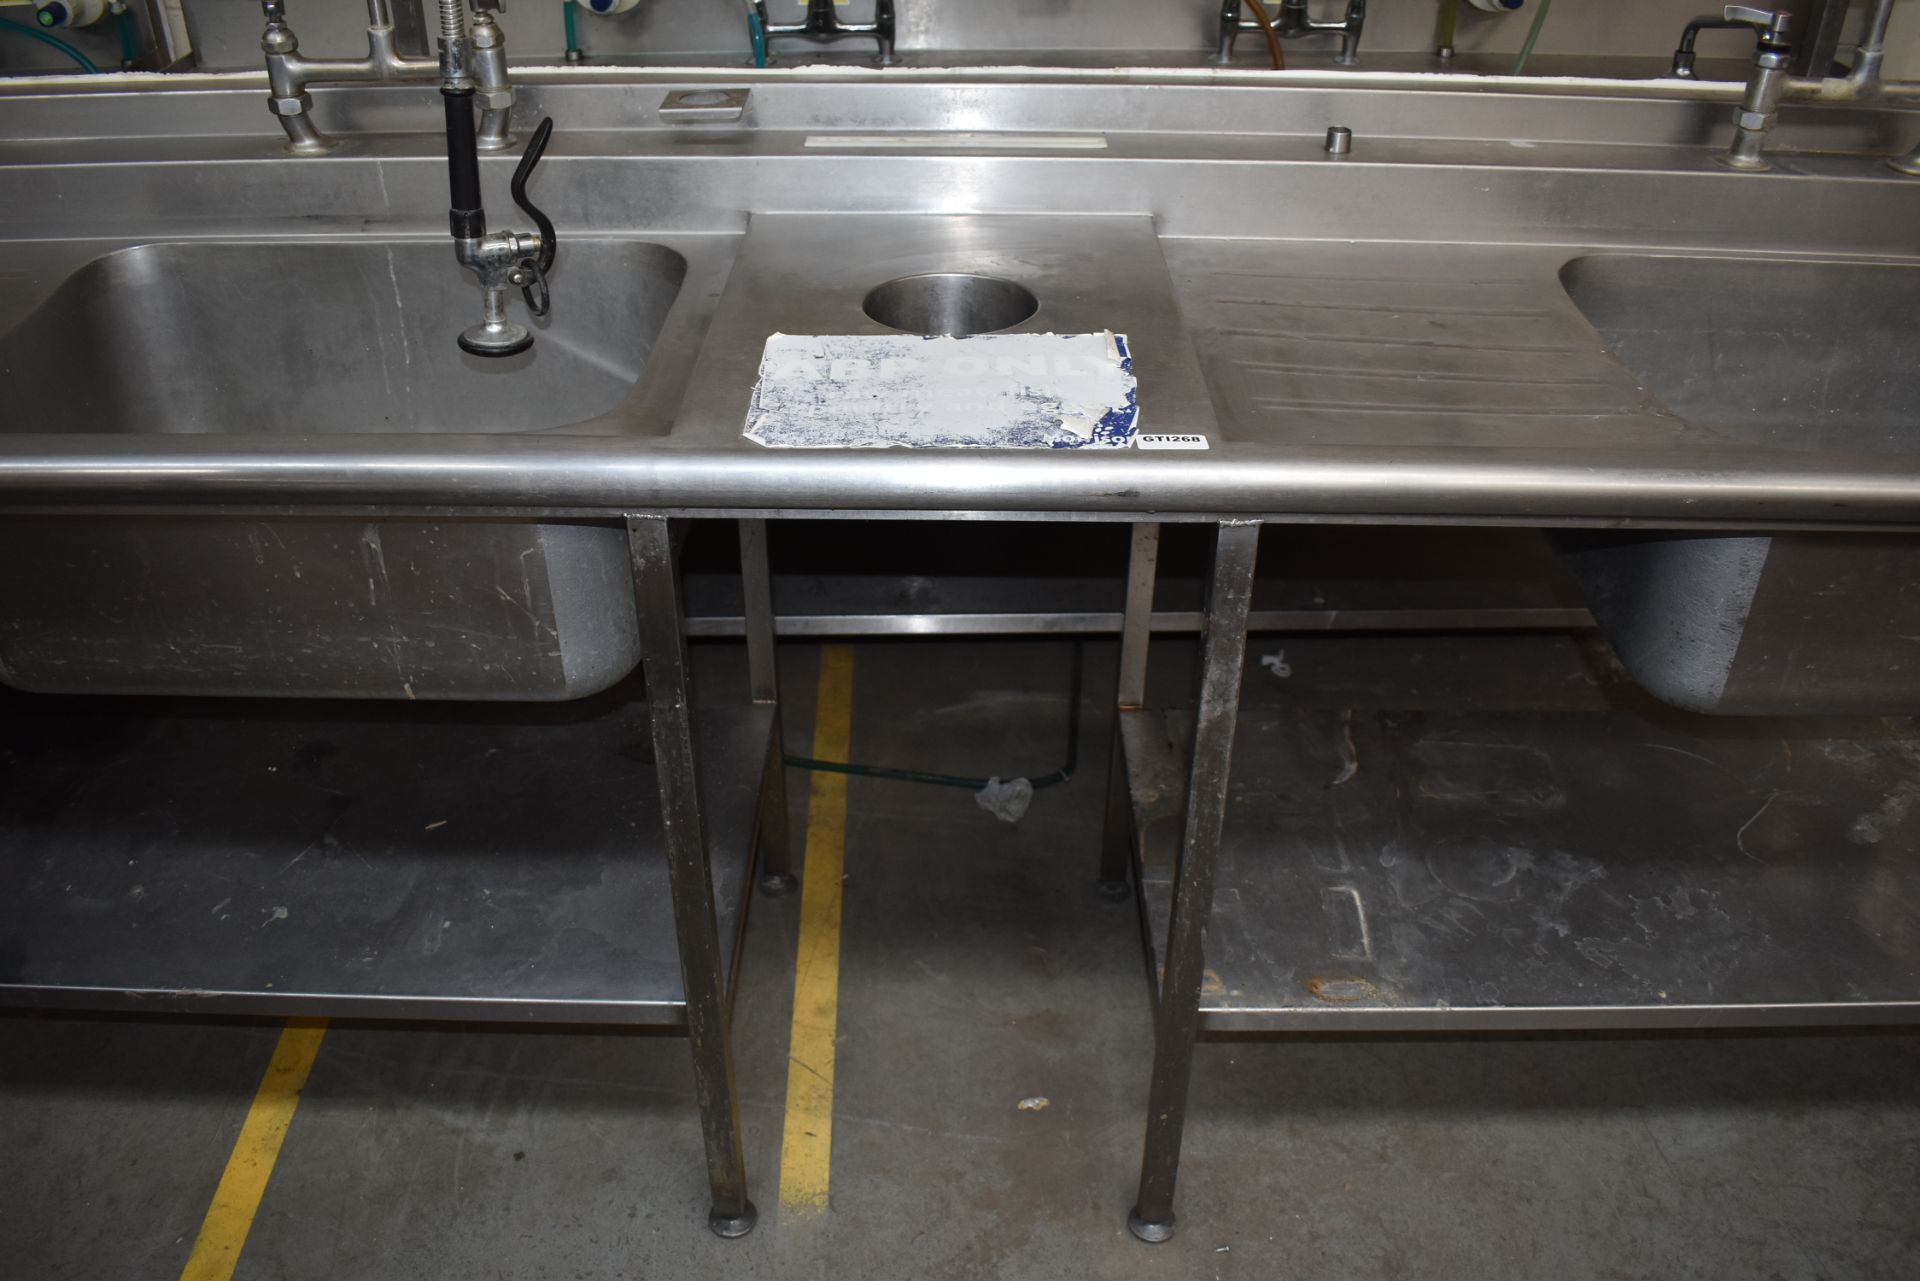 1 x Stainless Steel Commercial Wash Basin Unit With Twin Sink Bowl and Drainers, Mixer Taps, Spray - Image 2 of 12